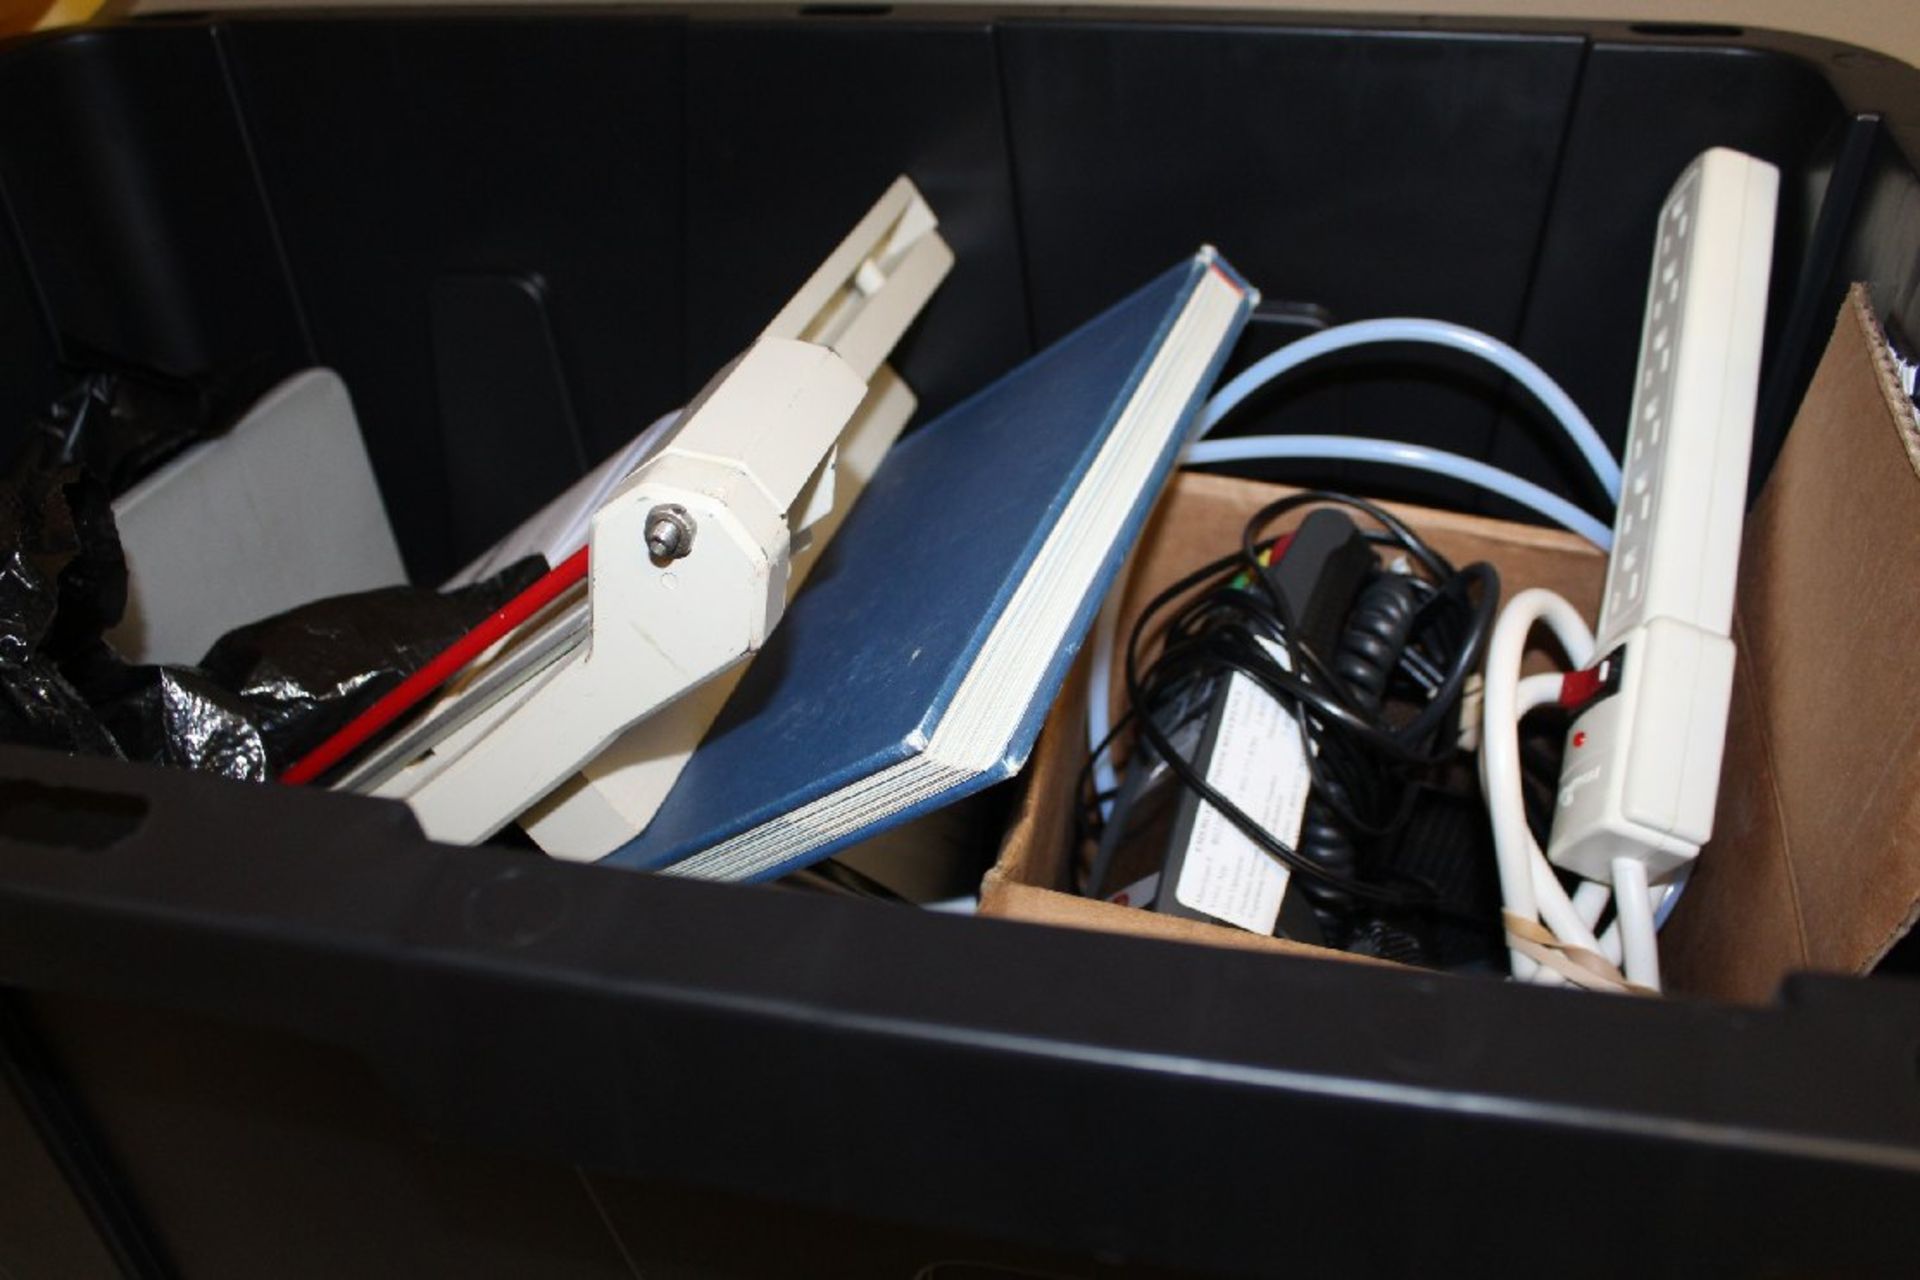 Duraflame Space Heater plus Contents of Bin, (cords, Paper cutter, books, etc.) - Image 3 of 3